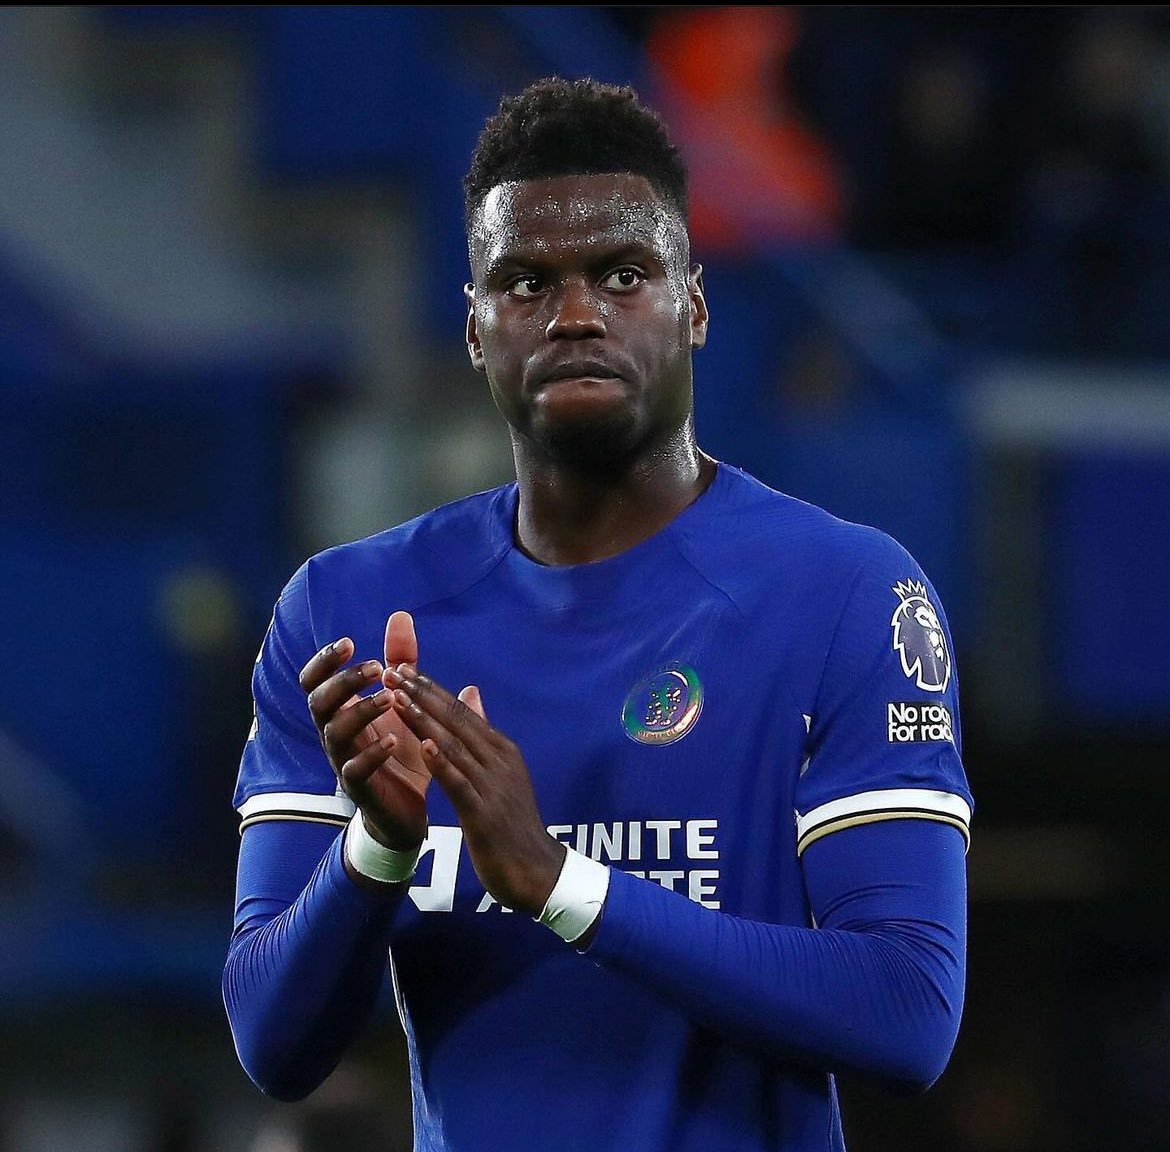 🇫🇷 Benoit Badiashile registered more successful passes (54/60) and blocked more shots (2) than any other player for either Arsenal or Chelsea inside the first 45 minutes. #CFC #ARSCHE #CHELSEA